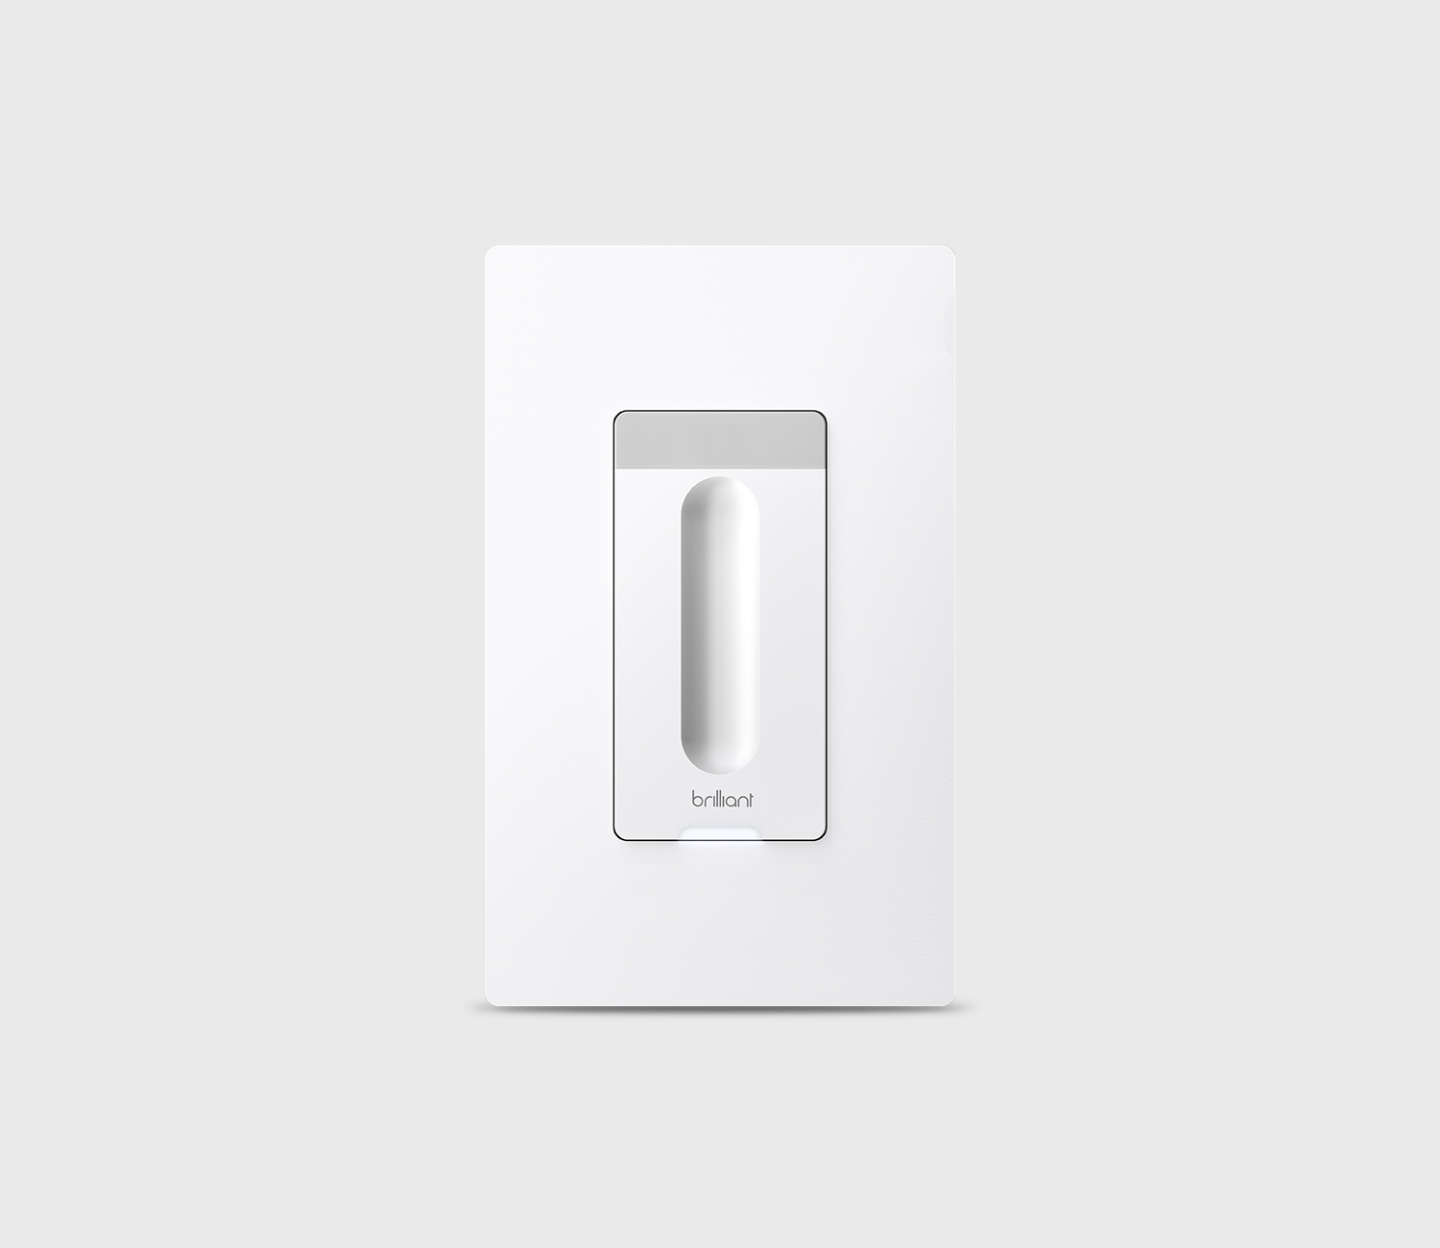 Christian Verbetering pad Brilliant: Smart Dimmer Switch